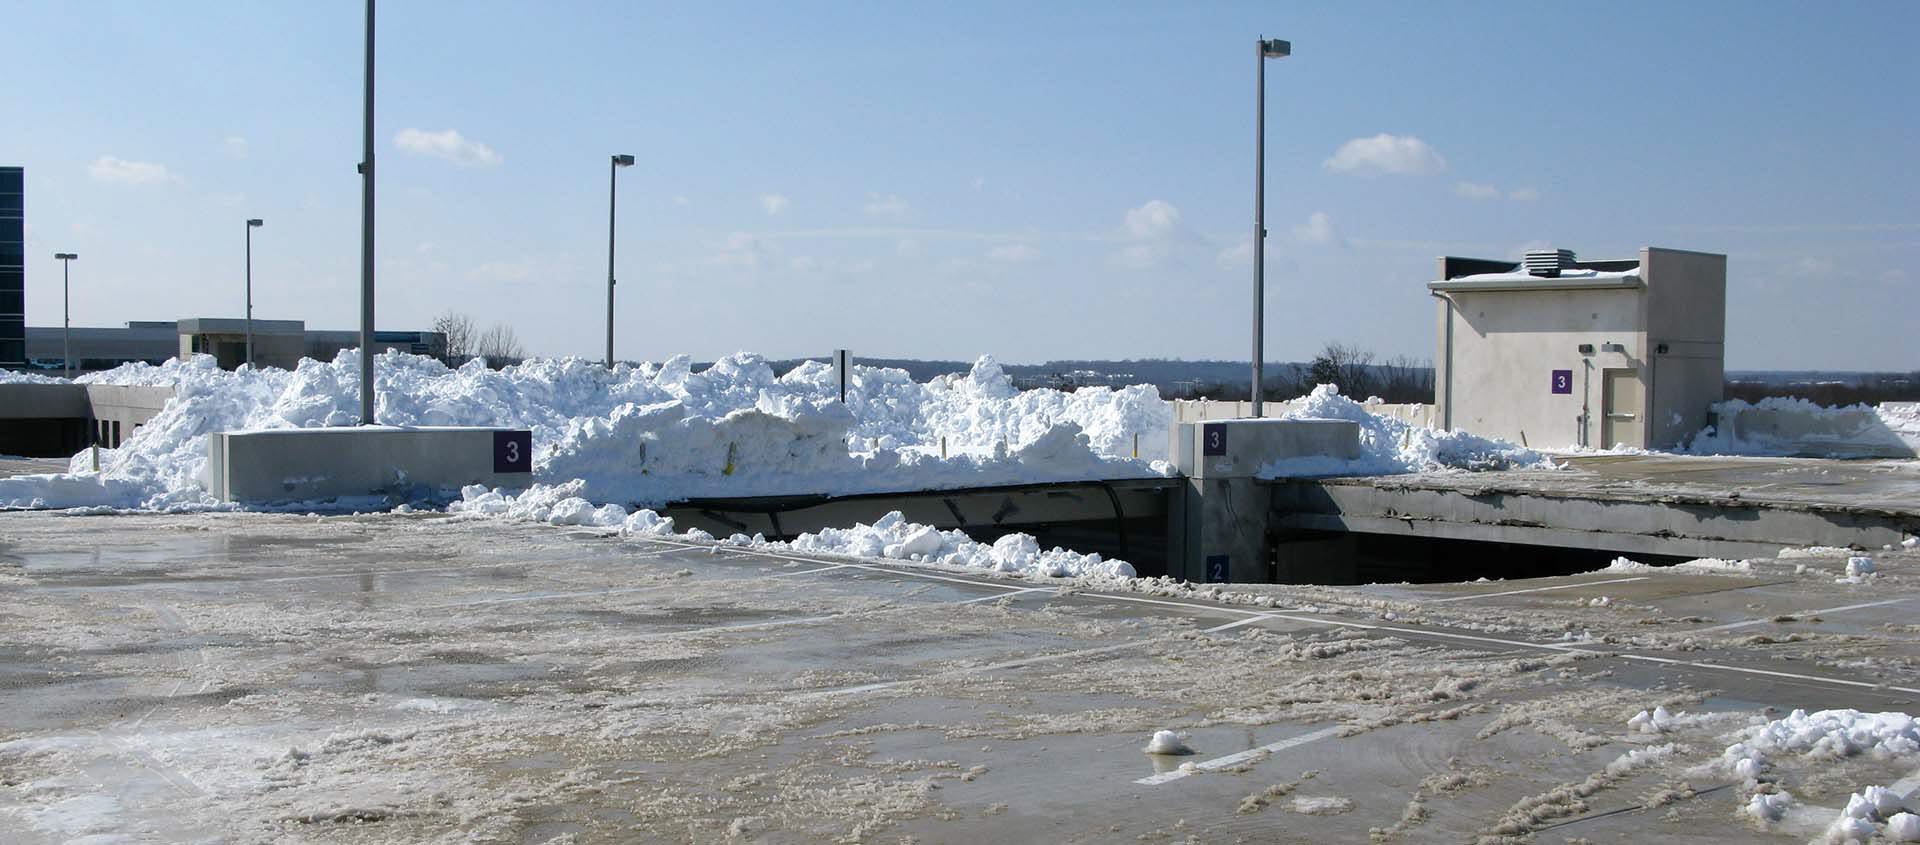 Snow piles and ice on the upper level of a parking structure